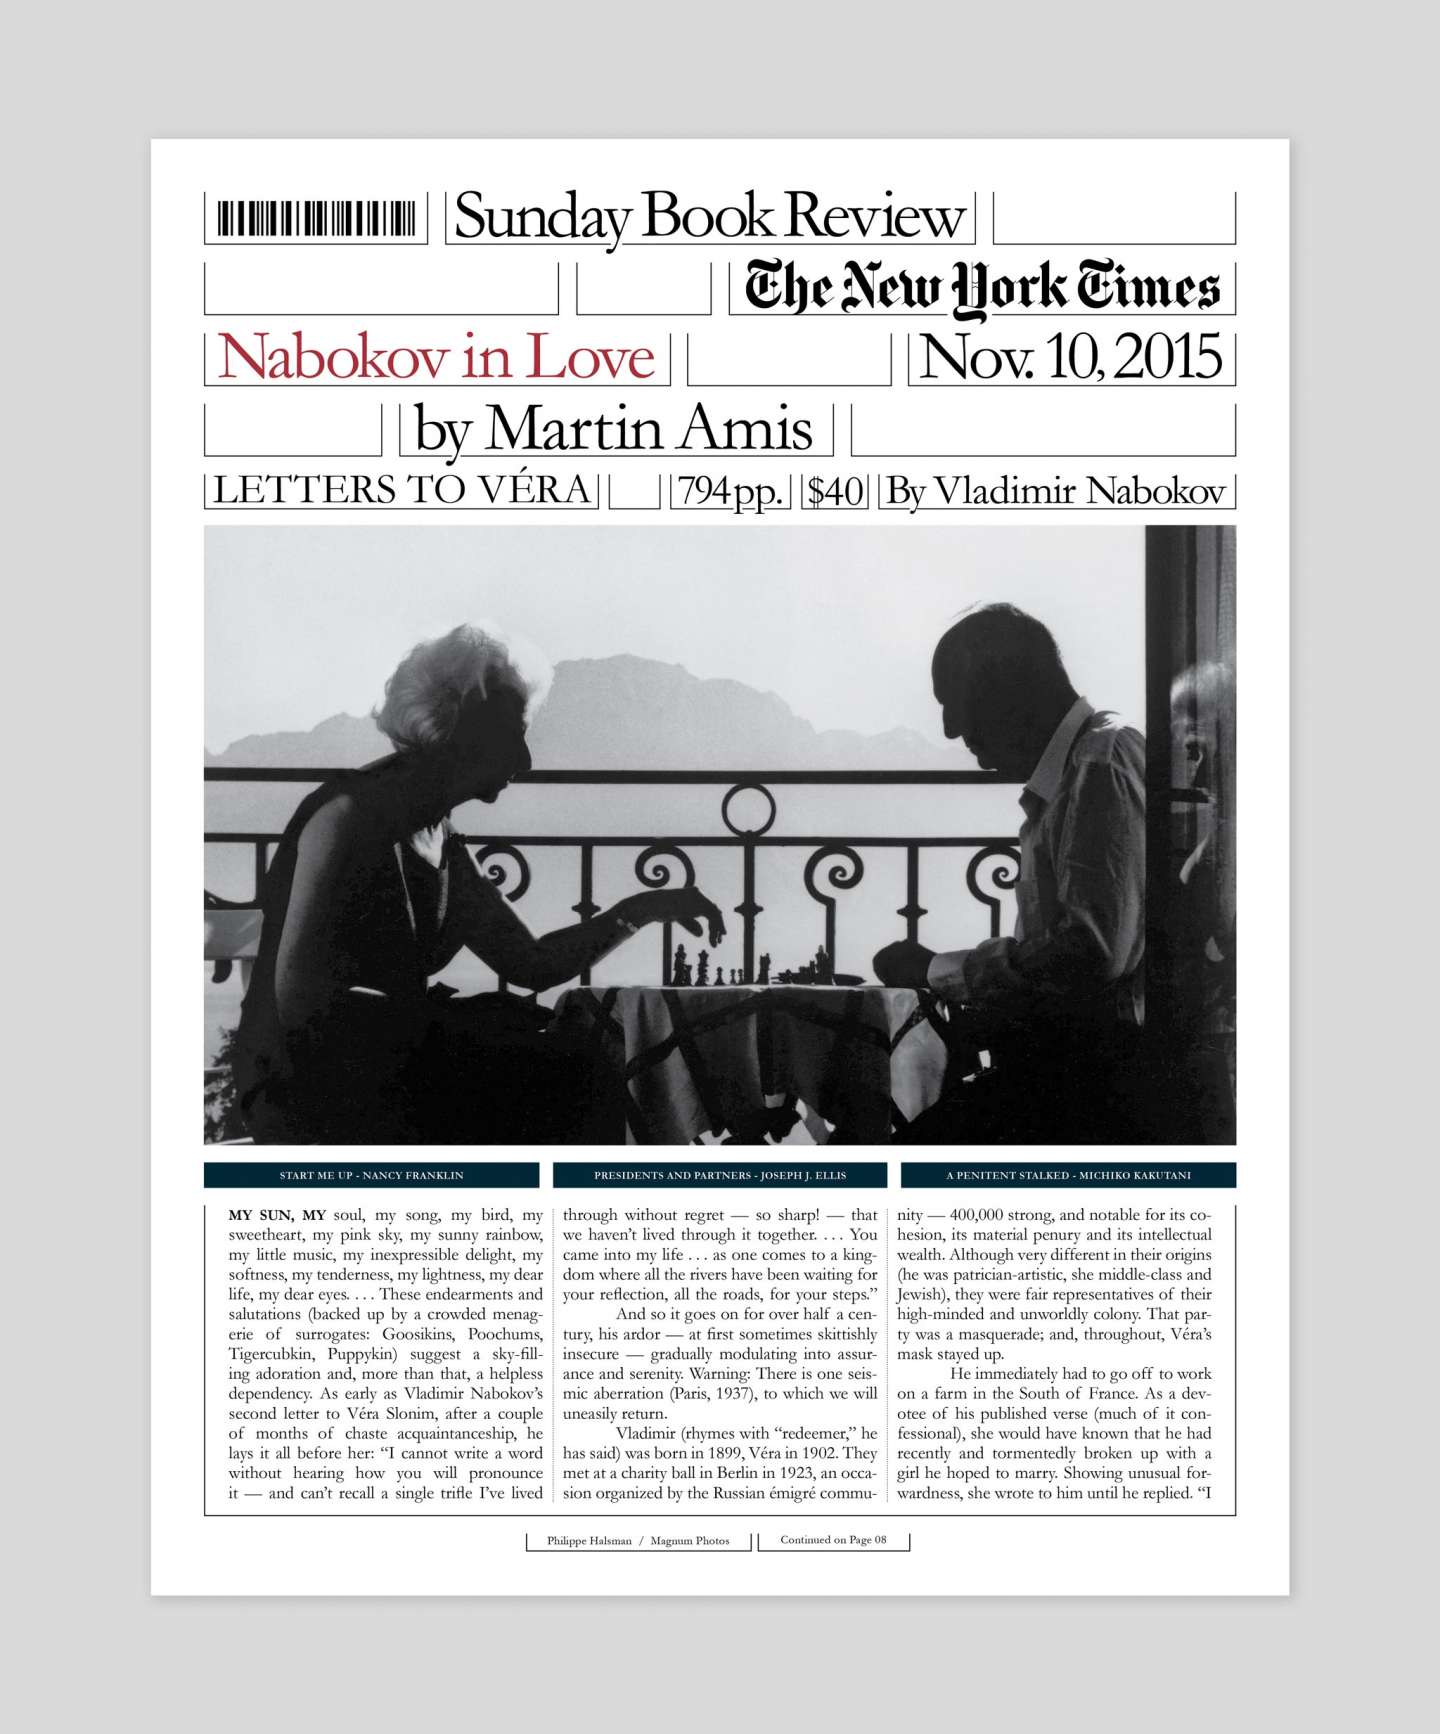 NY TIMES SUNDAY BOOK REVIEW